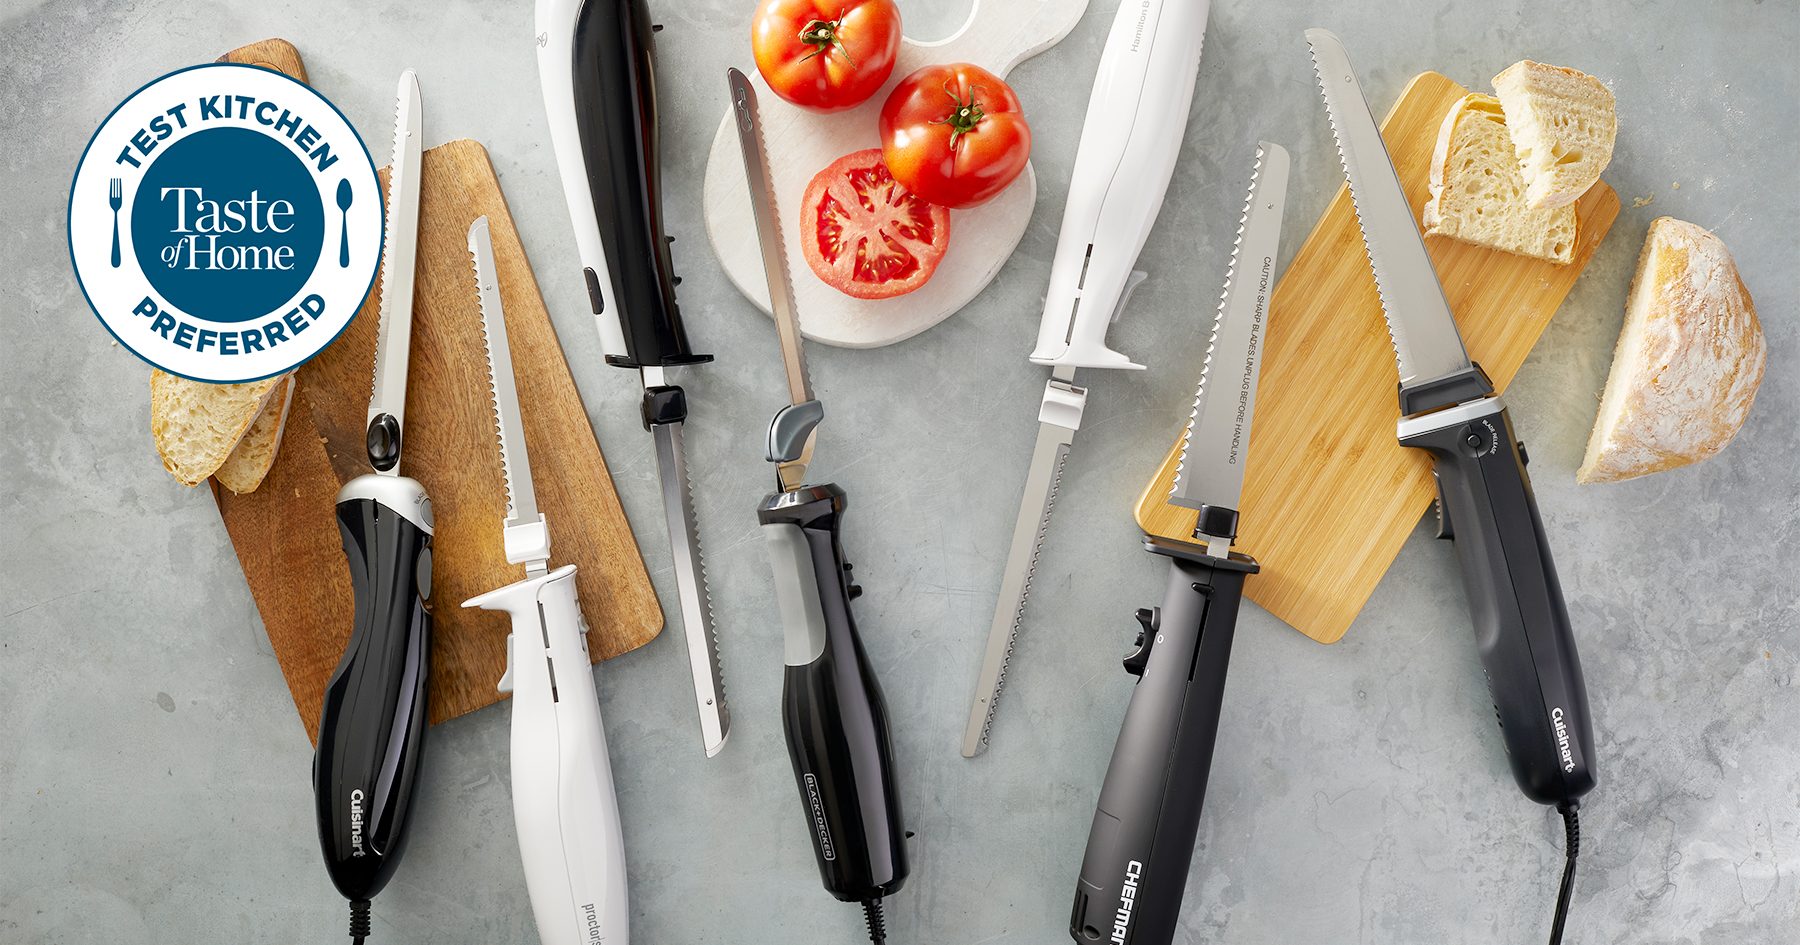 Does It Really Work: The Black and Decker Electric Knife 